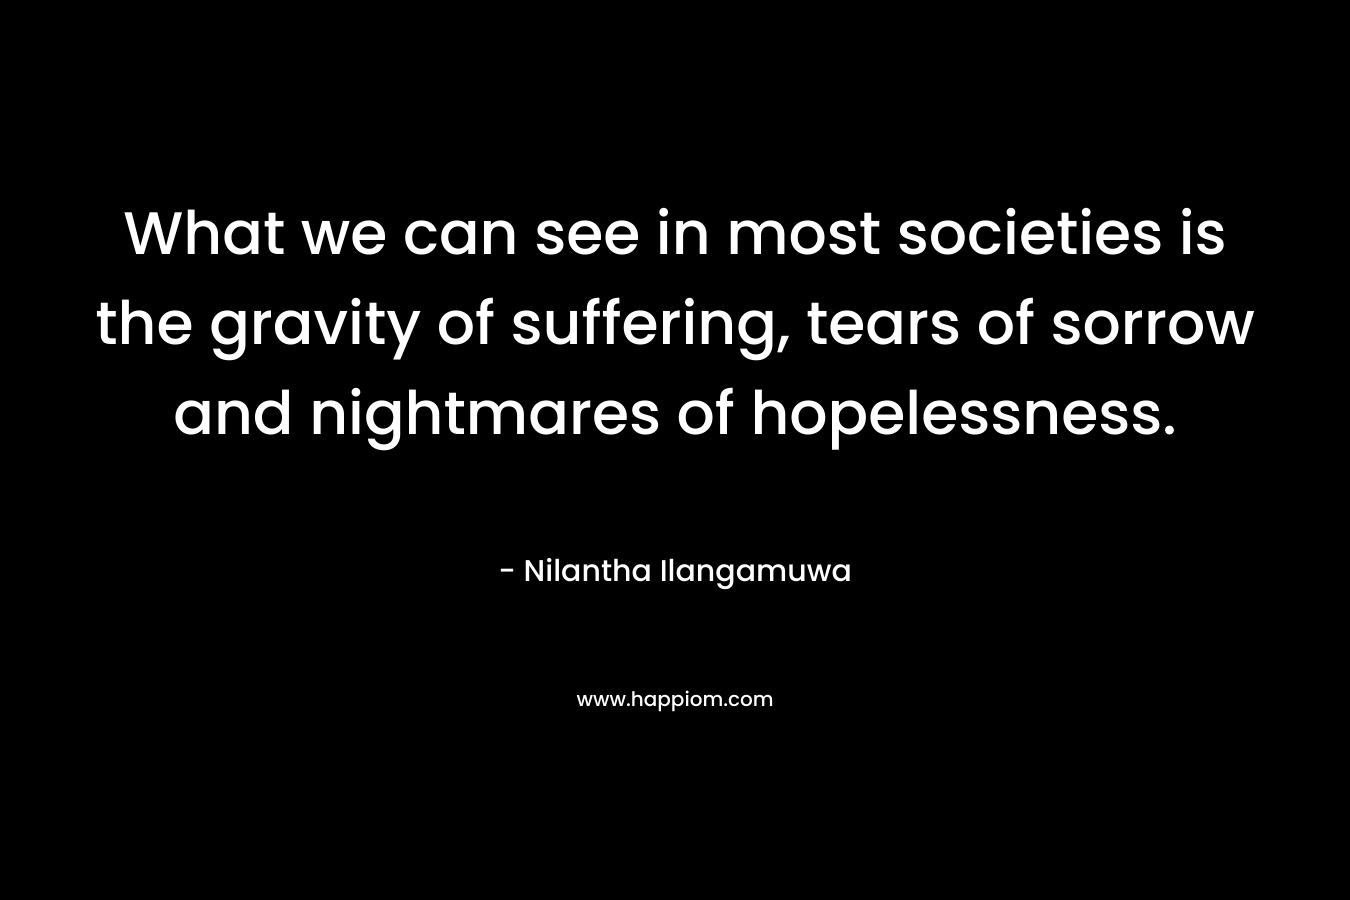 What we can see in most societies is the gravity of suffering, tears of sorrow and nightmares of hopelessness.